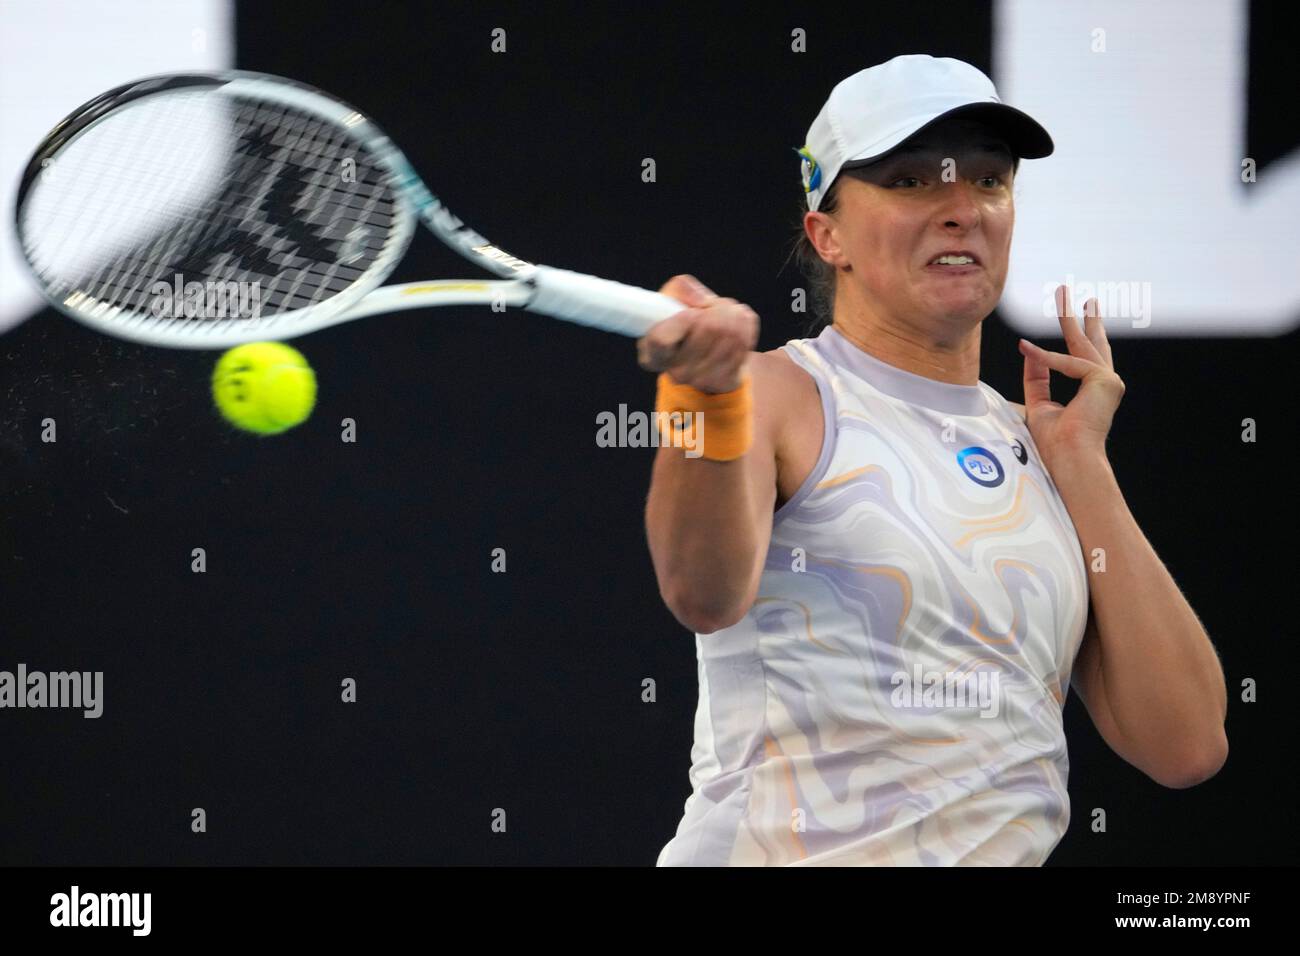 Iga Swiatek of Poland plays a forehand return to Jule Niemeier of Germany during their first round match at the Australian Open tennis championship in Melbourne, Australia, Monday, Jan